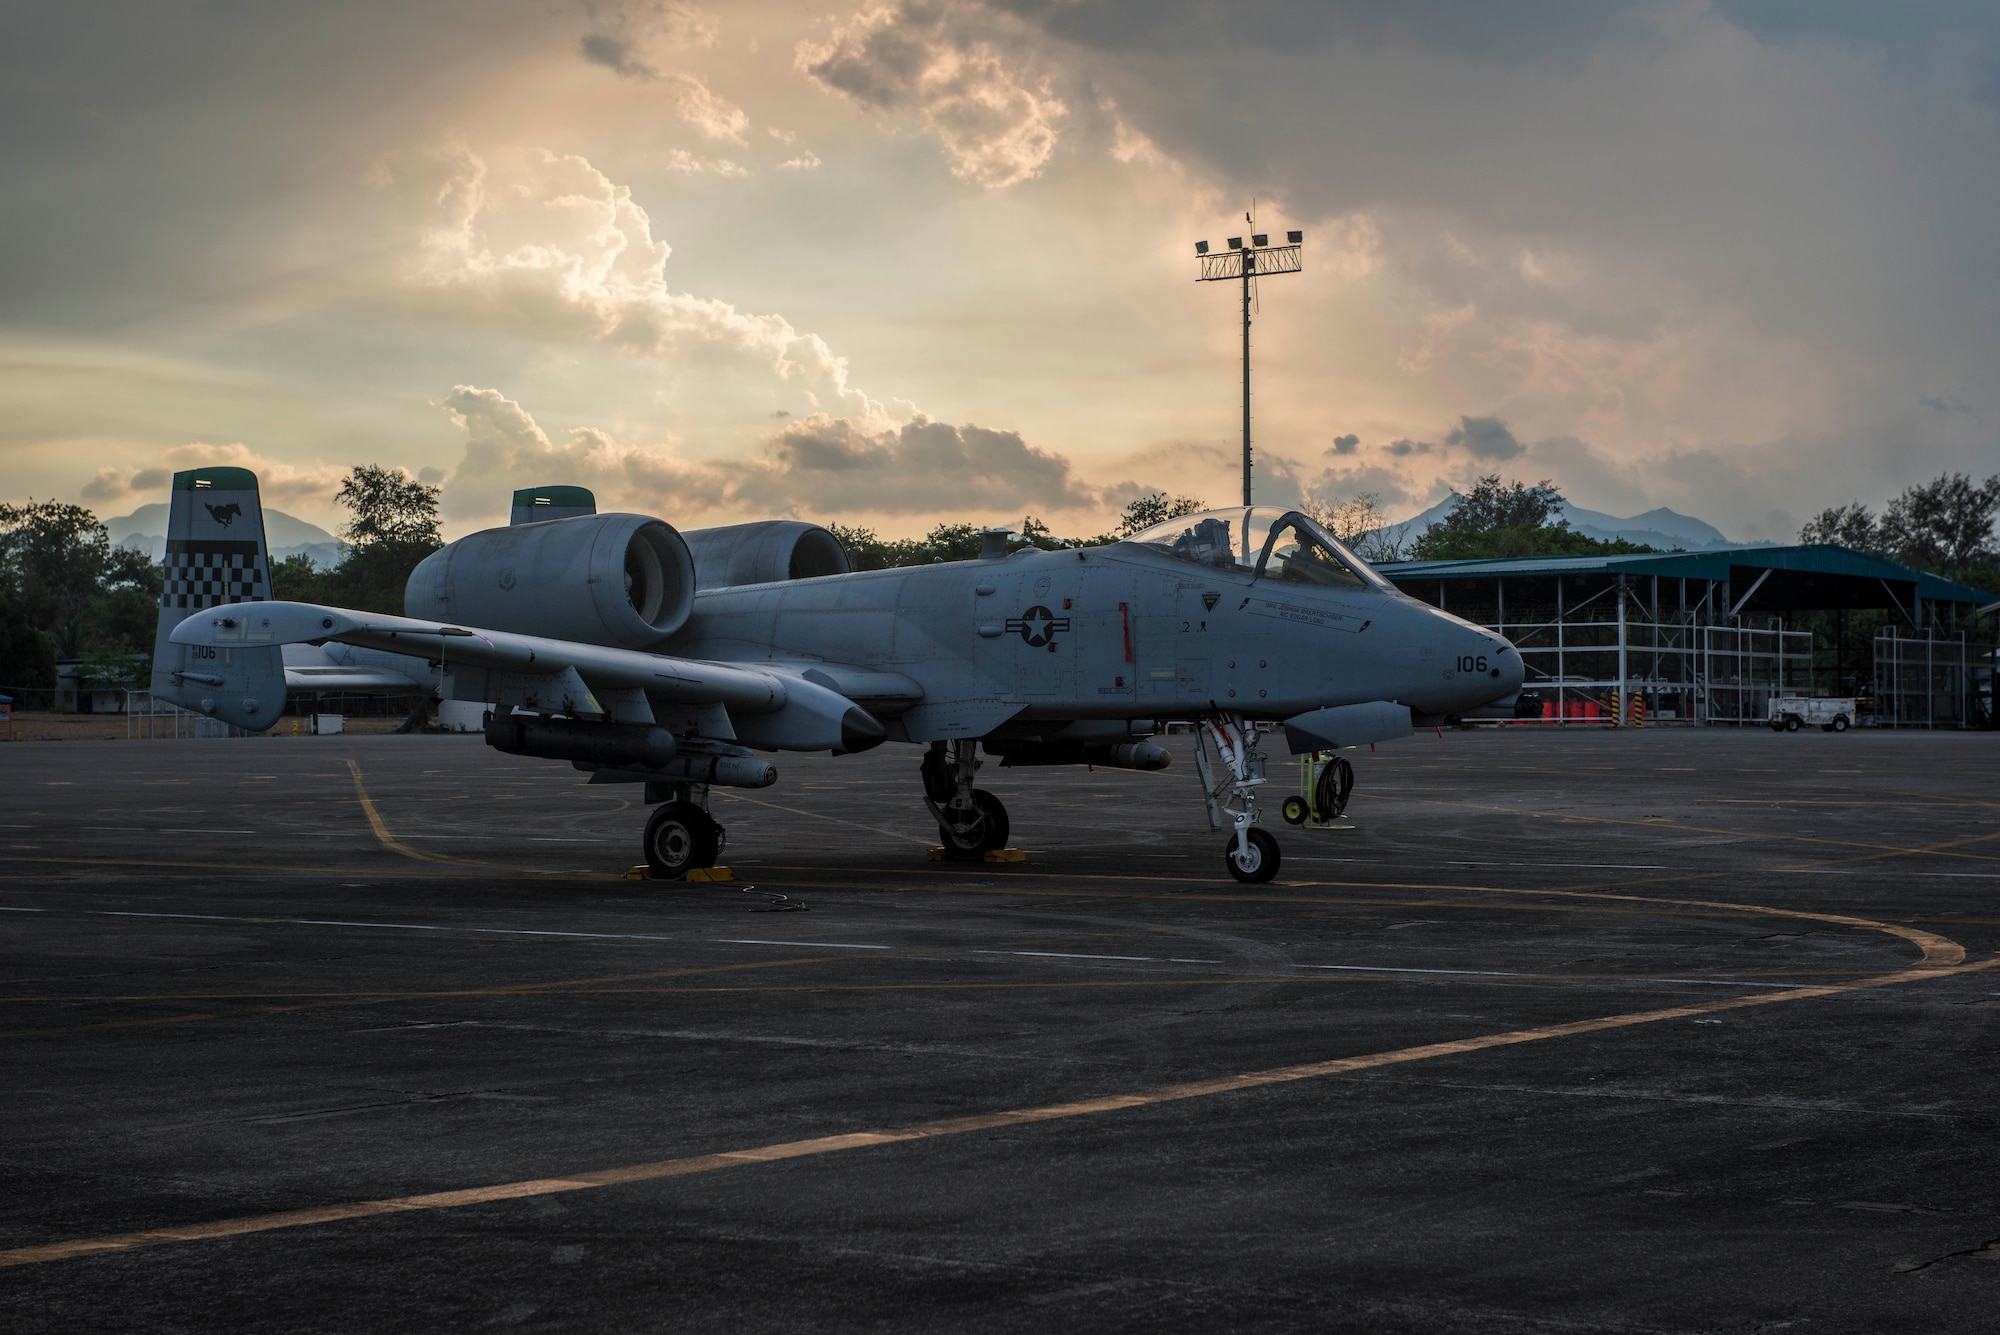 A U.S. Air Force A-10C Thunderbolt II, with the 51st Fighter Wing, Osan Air Base, Republic of Korea, sits on the flight line of Clark Air Base, Philippines, April 16, 2016, as part of a newly stood up Air Contingent in the Indo-Asia-Pacific region. The contingent's first iteration is comprised of five A-10Cs, three HH-60G Pavehawks and approximately 200 Pacific Air Forces personnel including aircrew, maintainers, logistics and support personnel. The A-10C were chosen as they were already in place supporting Exercise Balikatan 16 and have a proven record operating out of short and austere airstrips, provide a flexible range of capabilities, and have a mission profile consistent with the air and maritime domain awareness operations the air contingent will conduct. (U.S. Air Force photo by Staff Sgt. Benjamin W. Stratton)